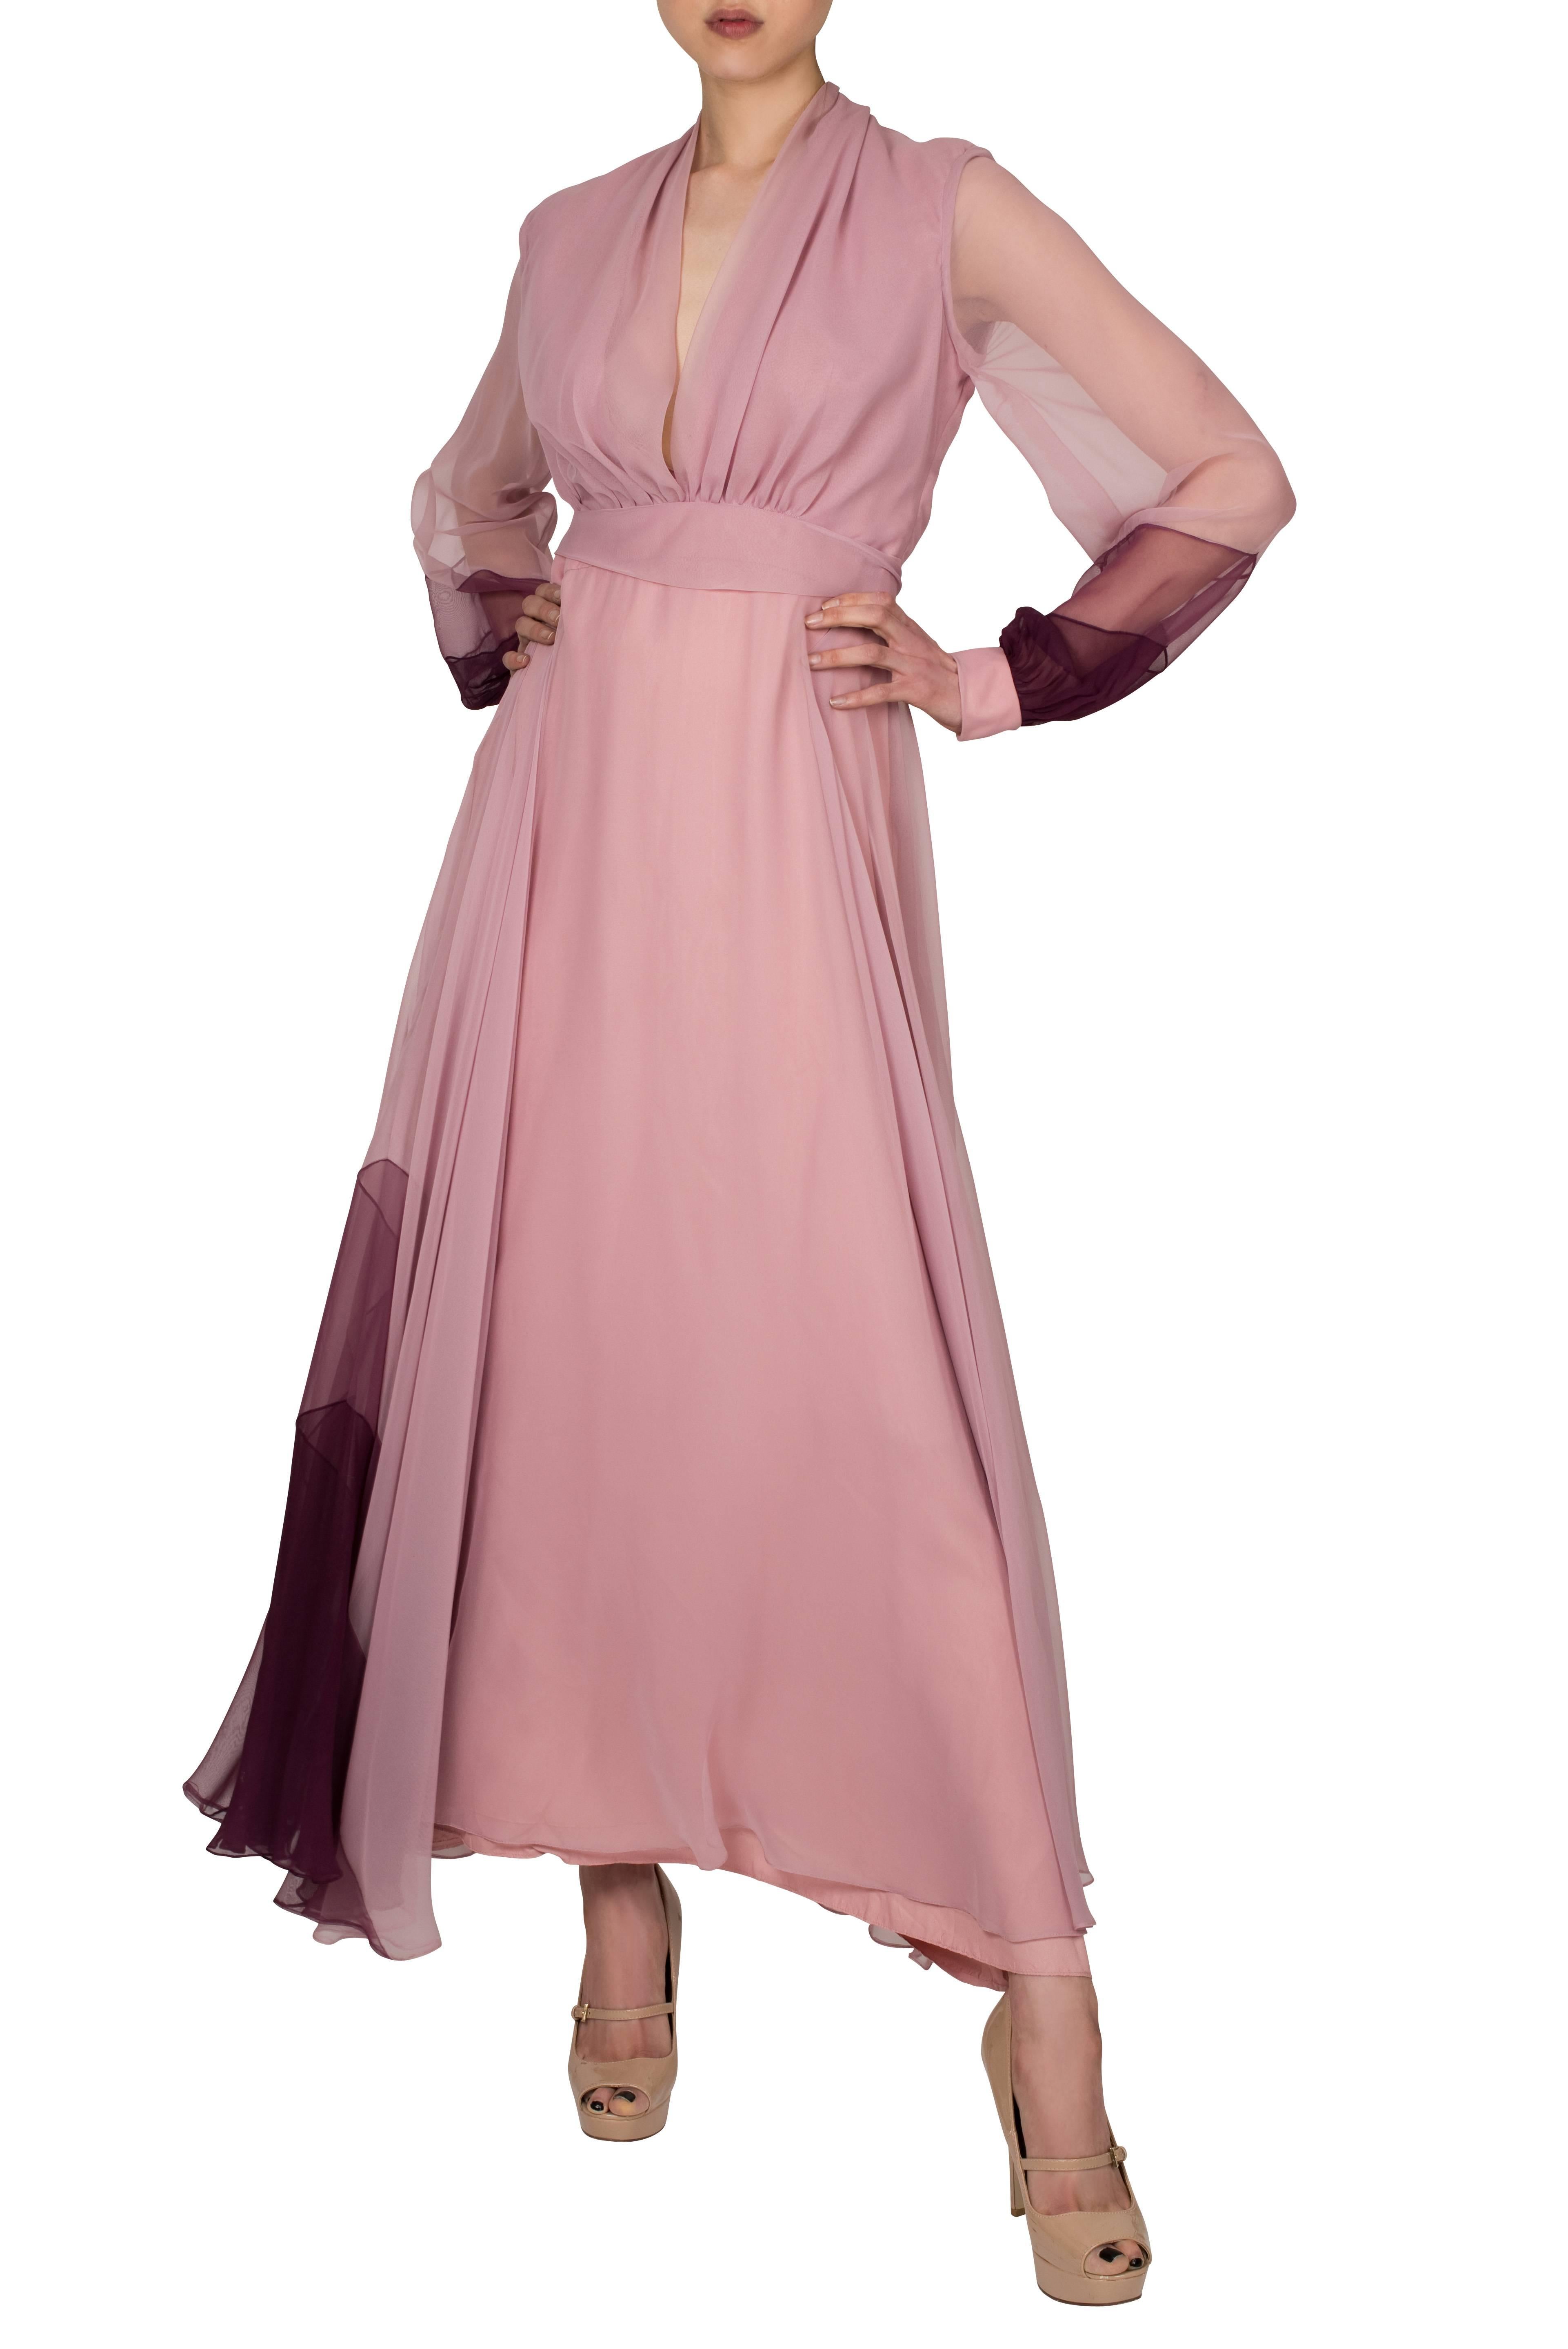 Stunning 1970's gown with a shawl neckline which flatters the décolletage. With an empire waist accentuated by a belt in the same fabric, the dress features sheer sleeves with a darker insert on the cuffs. A flared skirt complements the shape of